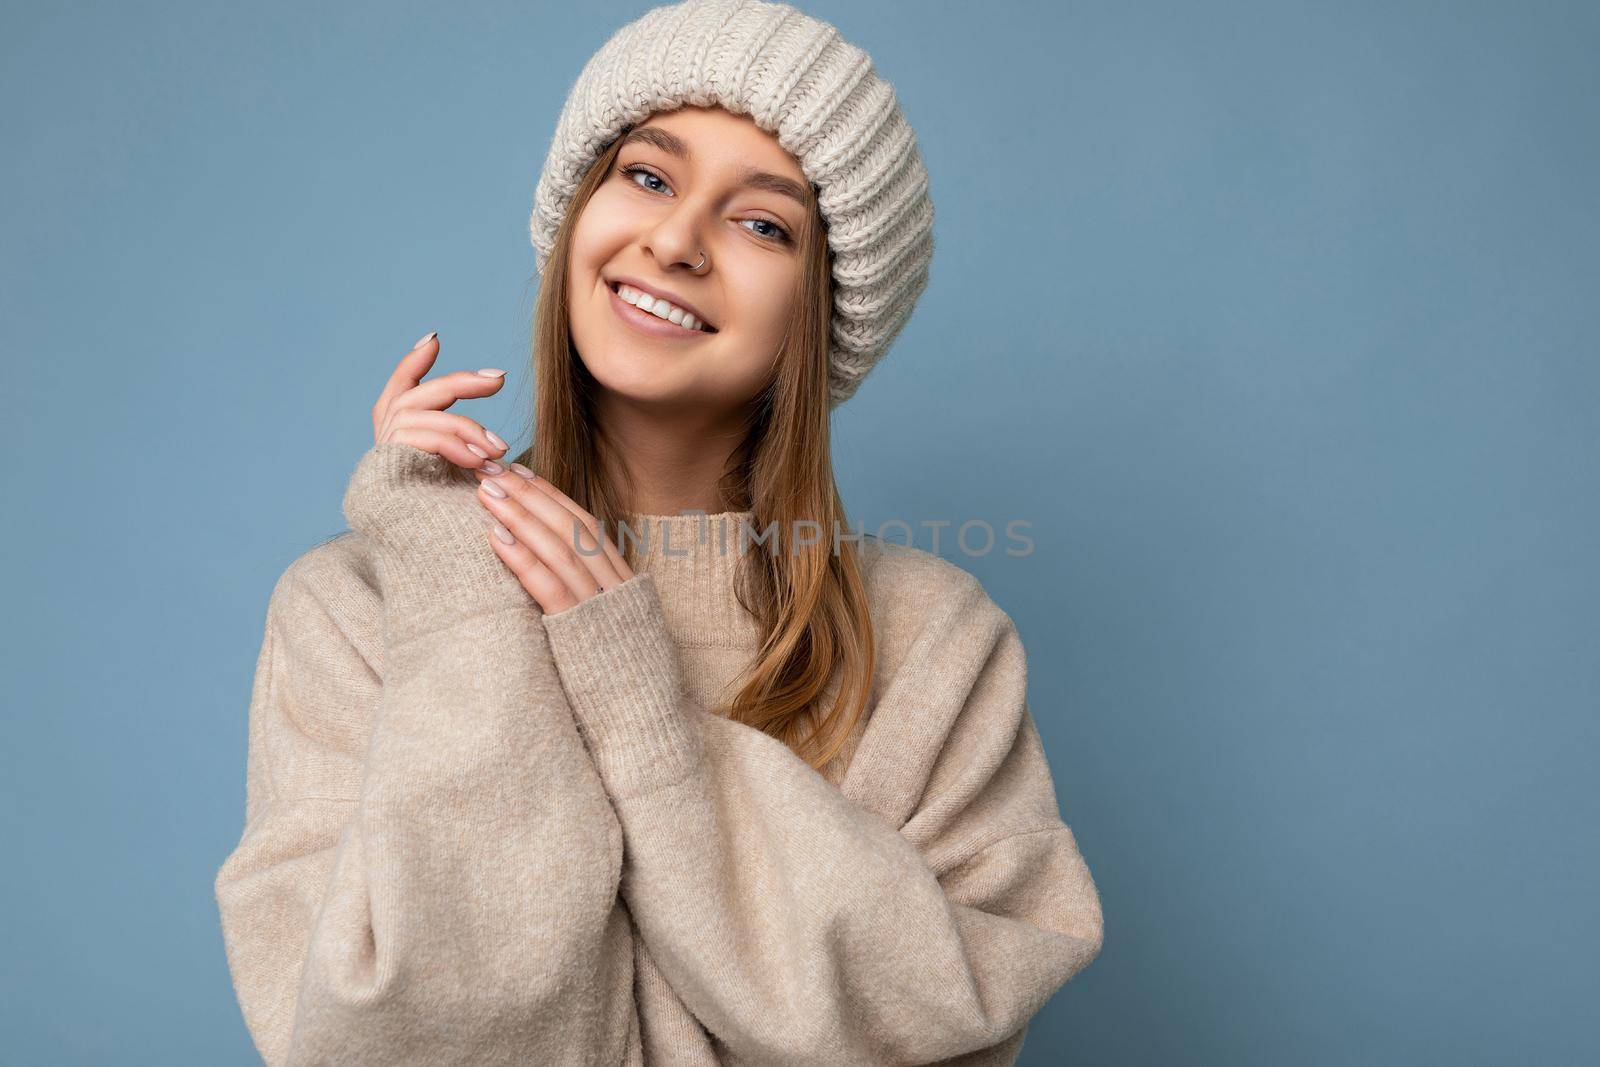 Portrait of fascinating smiling happy young dark blonde woman isolated over blue background wall wearing beige warm sweater and knitted beige hat looking at camera by TRMK